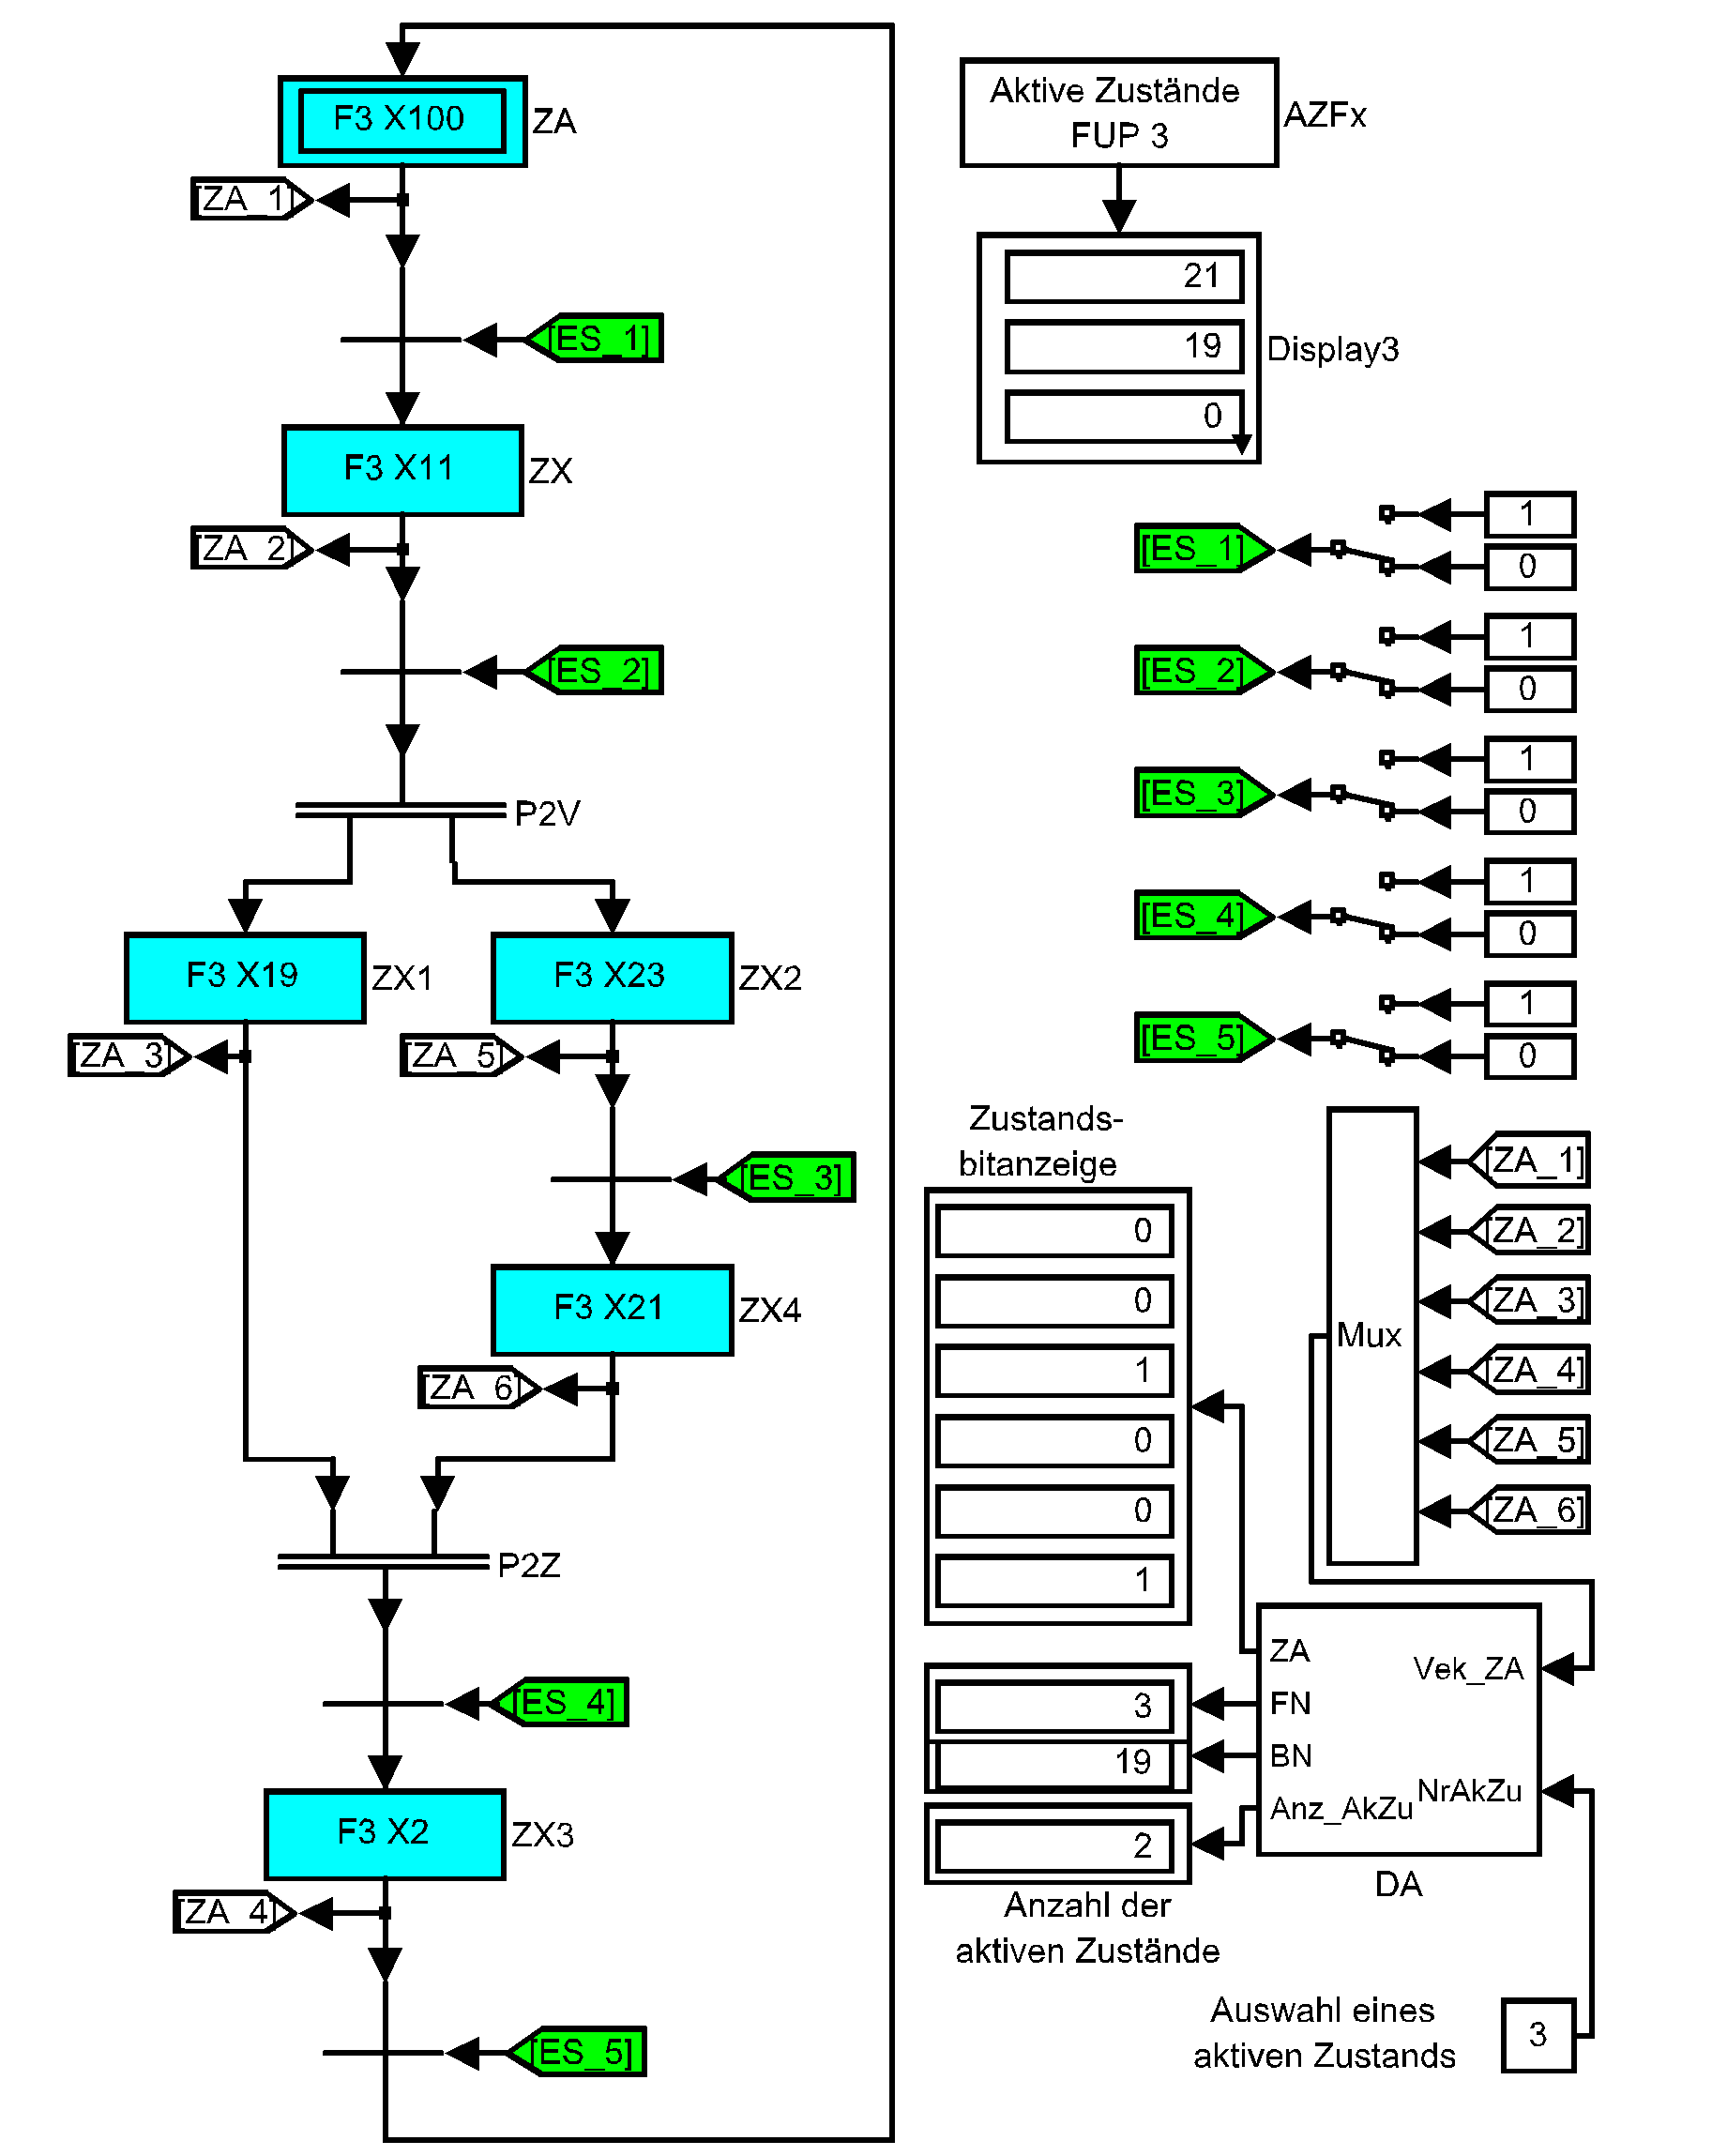 Example 3: Simple parallel branching